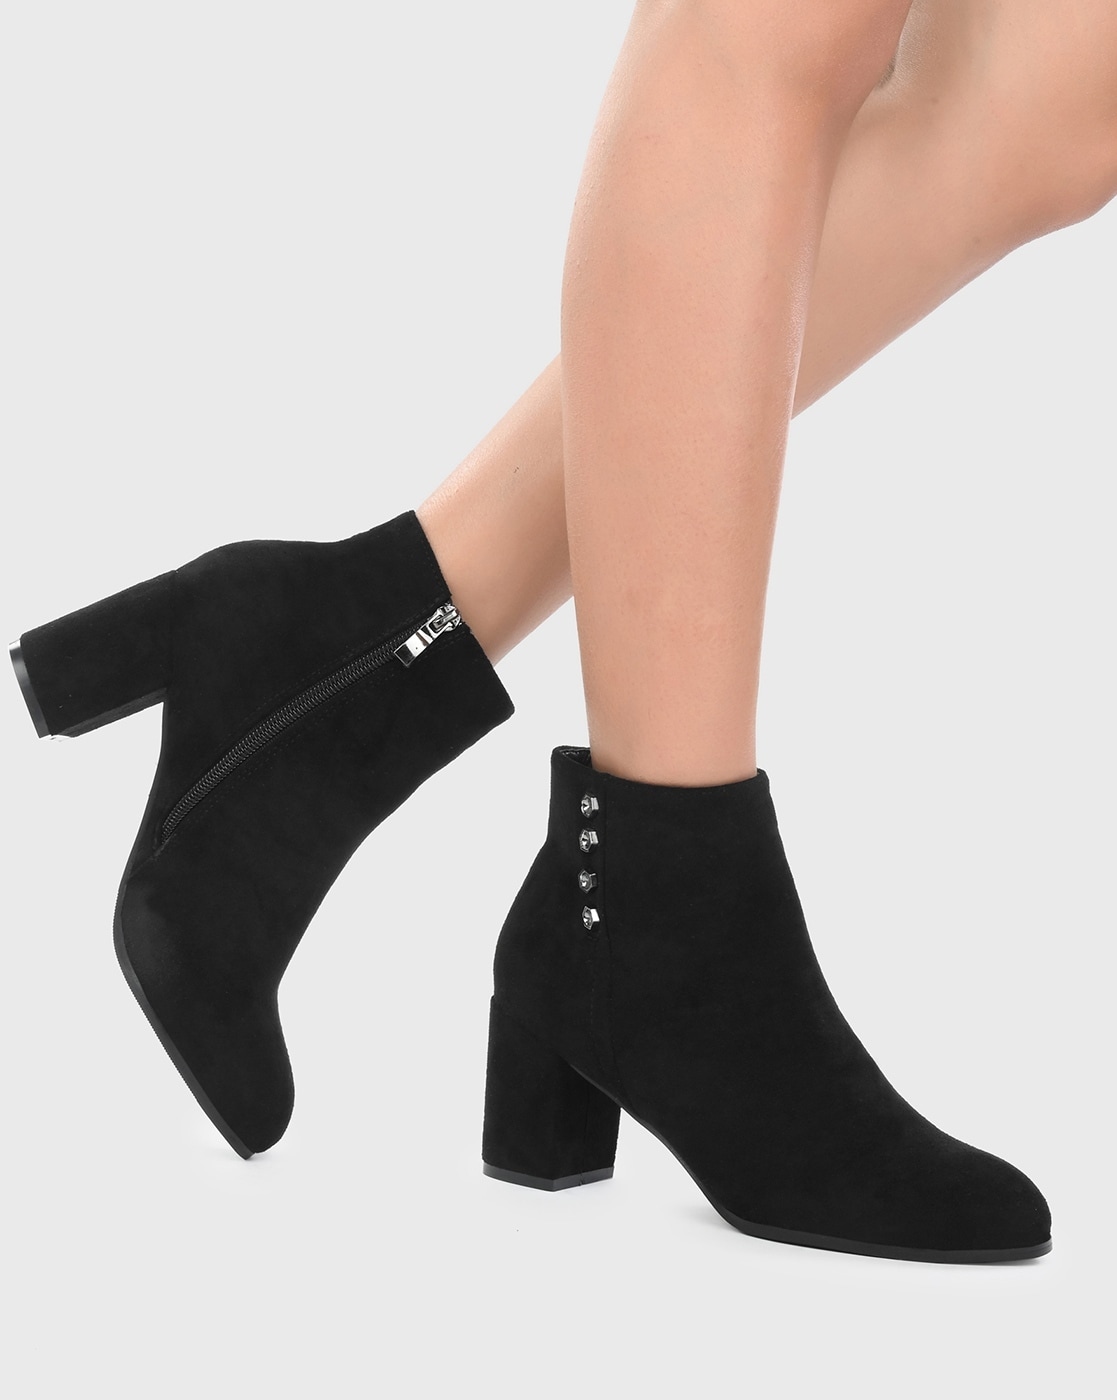 Fancy footwear: A pair of polished leather high heeled ankle boots added  extra height to the 5ft7in brunet… | Black boots outfit, Booties outfit,  Jeans outfit women